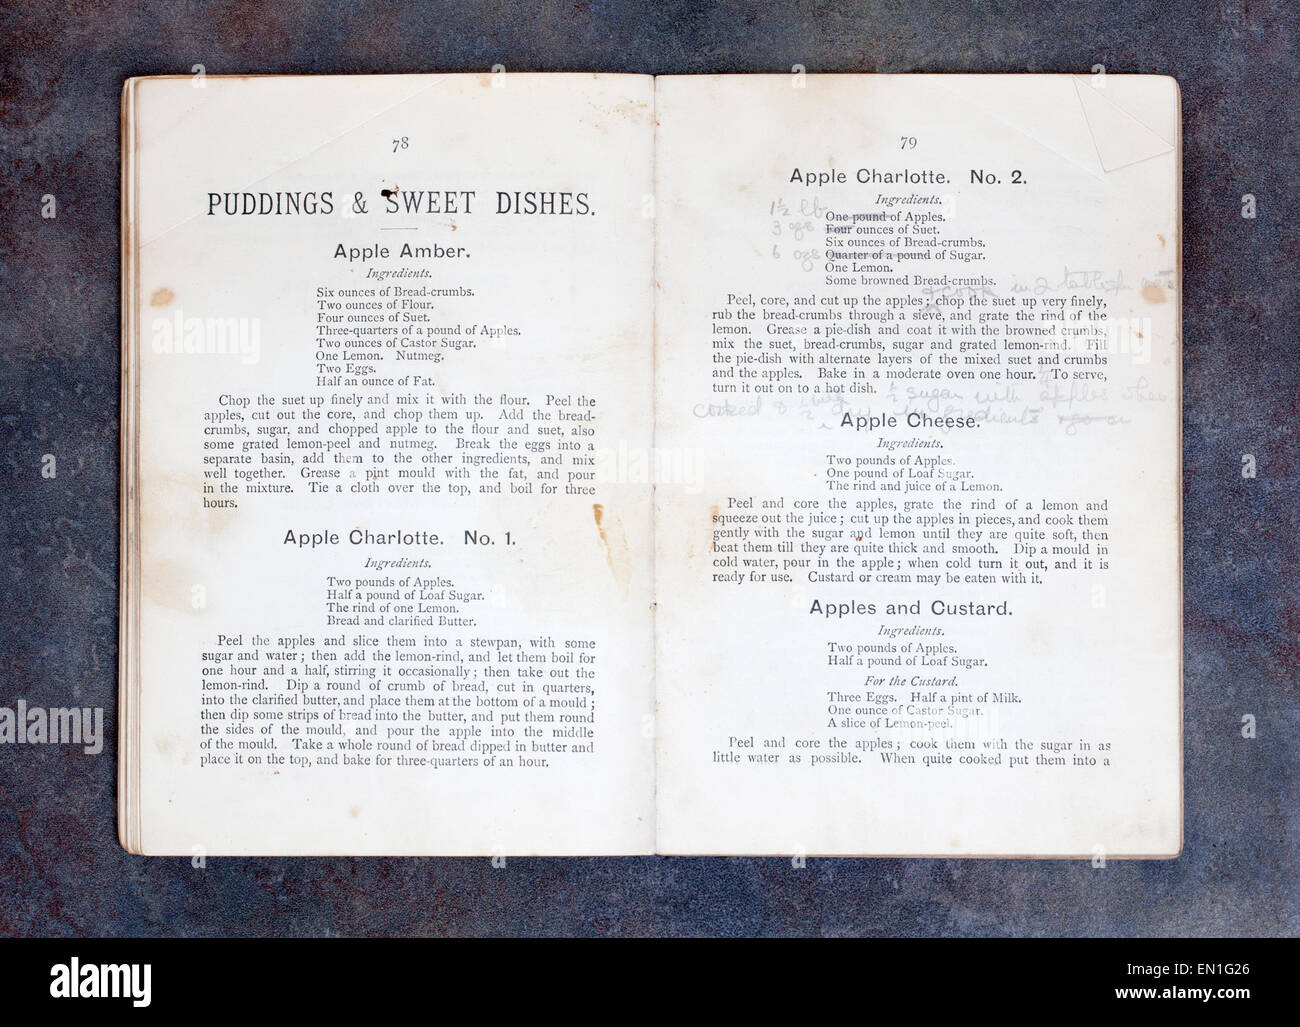 Puddings and Sweets Chapter - Plain Cookery Recipes Book by Mrs Charles Clarke for the National Training School for Cookery Stock Photo